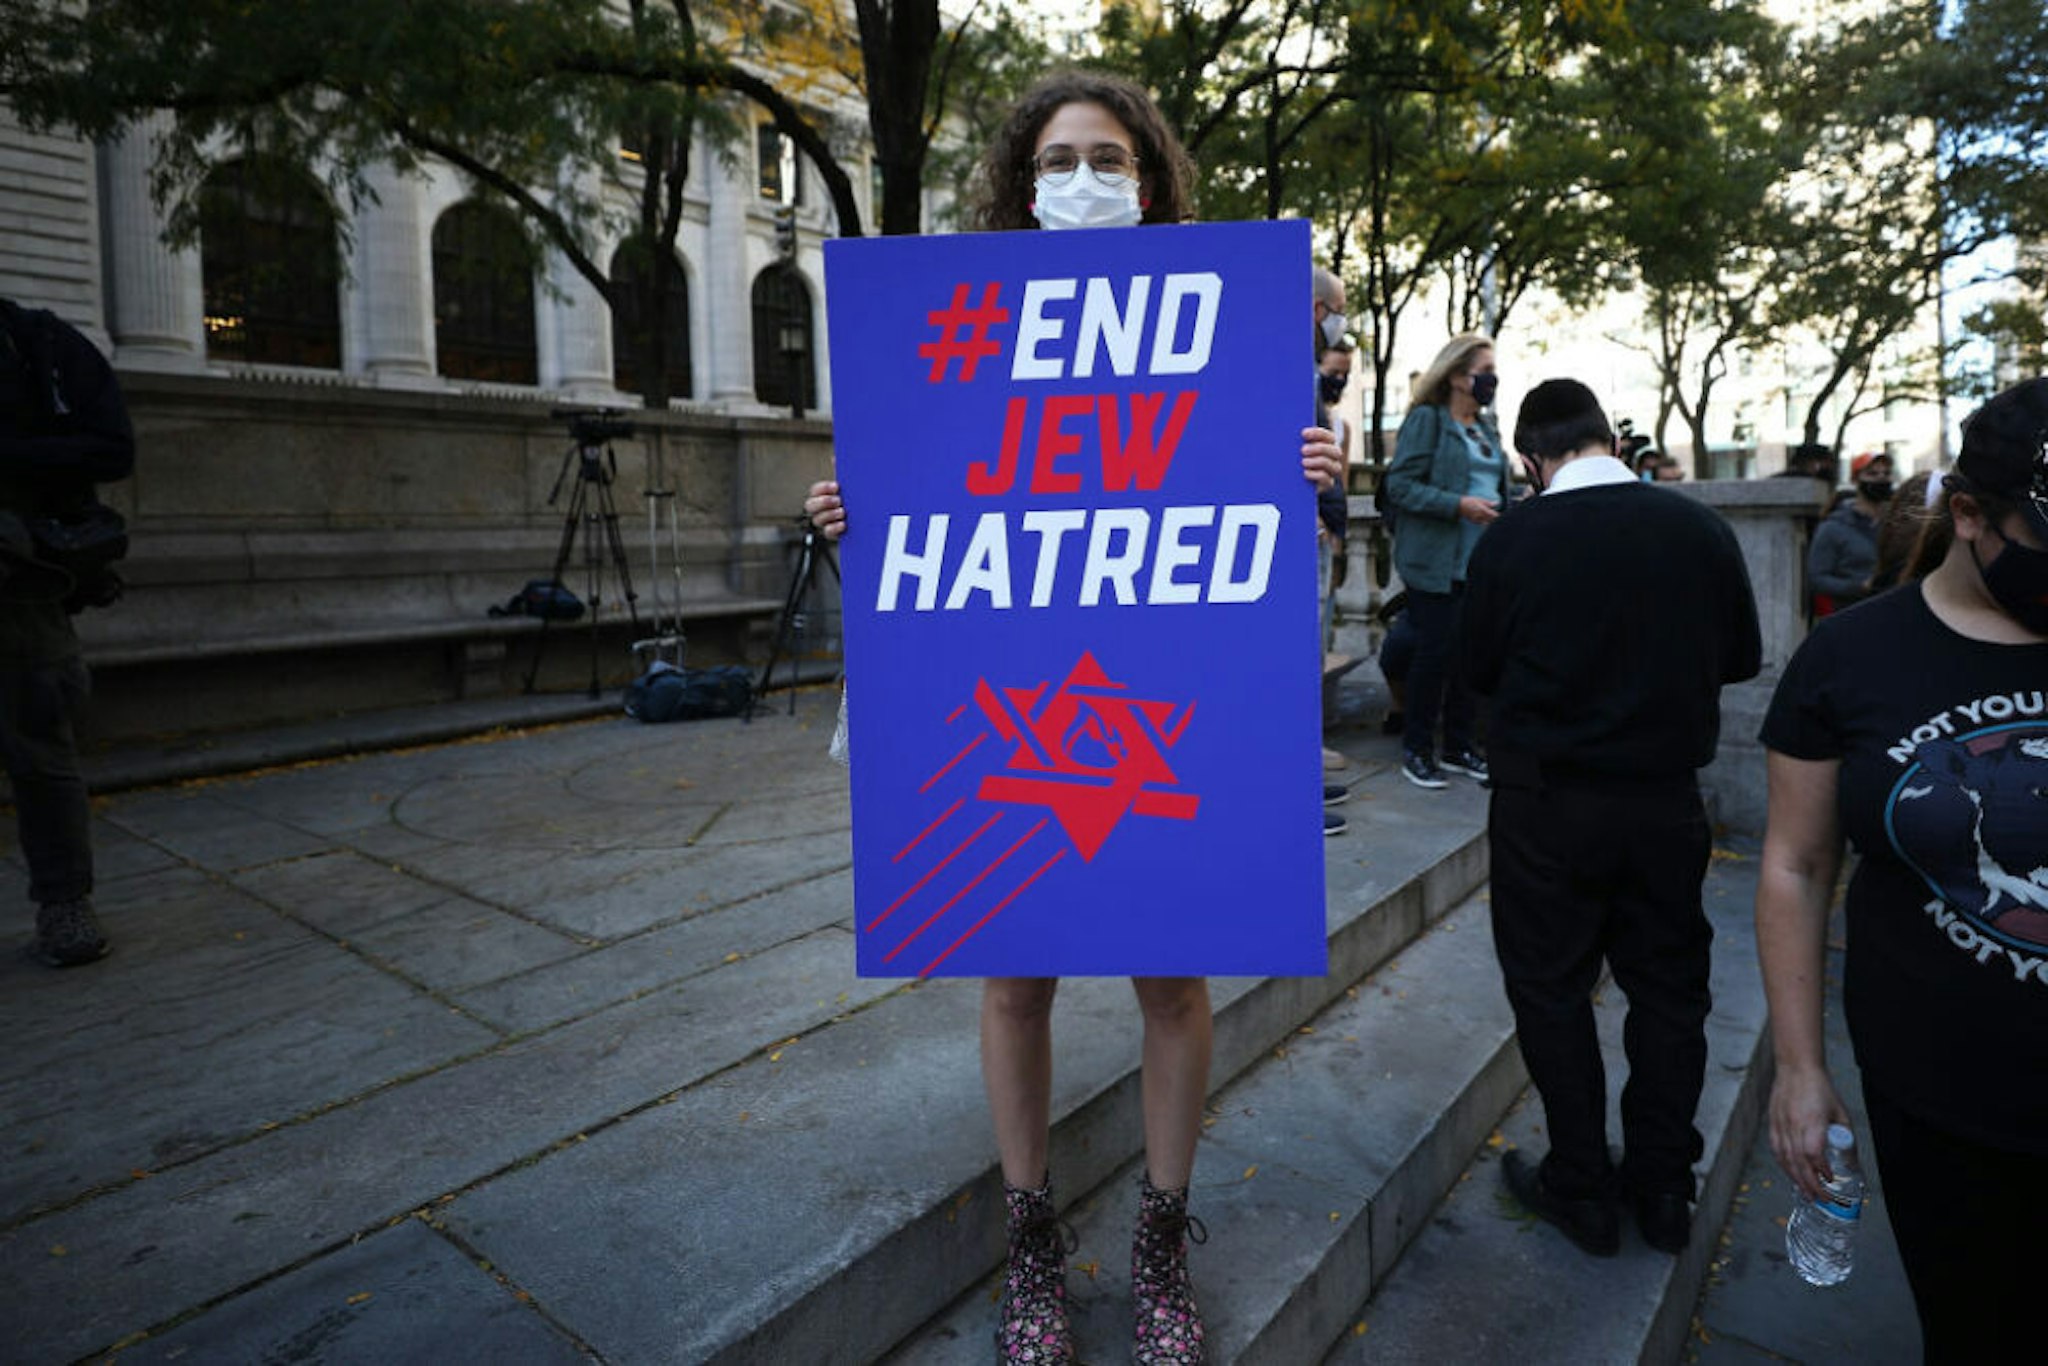 NEW YORK, USA - OCTOBER 15: Jews are gathered in front of the New York Public Library on 5th Ave. to protest anti-semitism as 'End Jew Hatred' in Manhattan of New York City, United States on October 15, 2020.